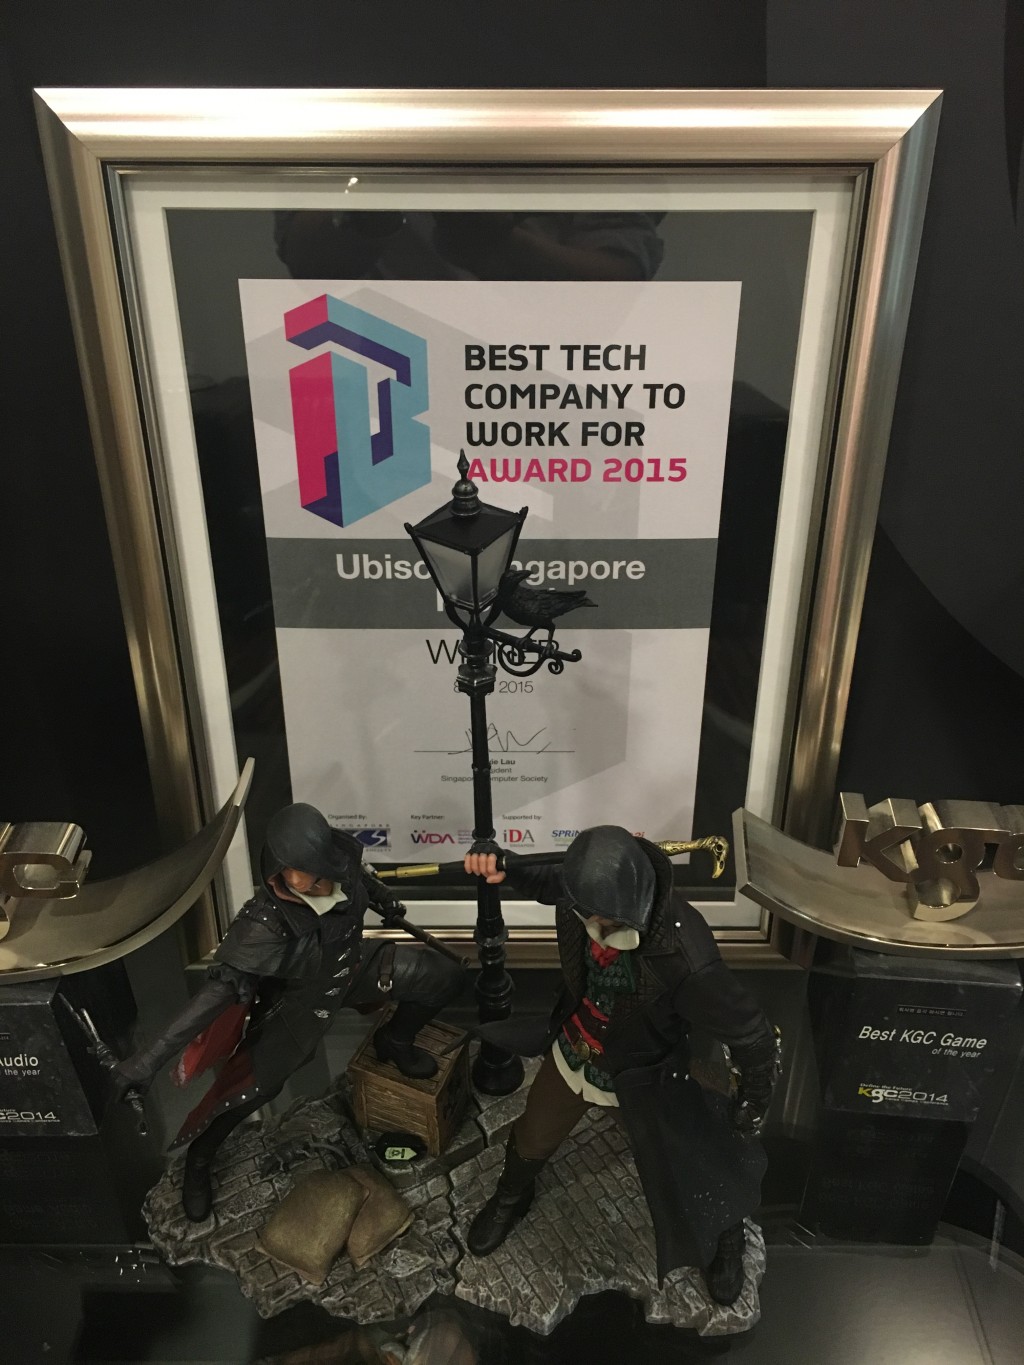 Ubisoft Singapore named as Best Tech Company to Work For in 2015 by Singapore Computer Society